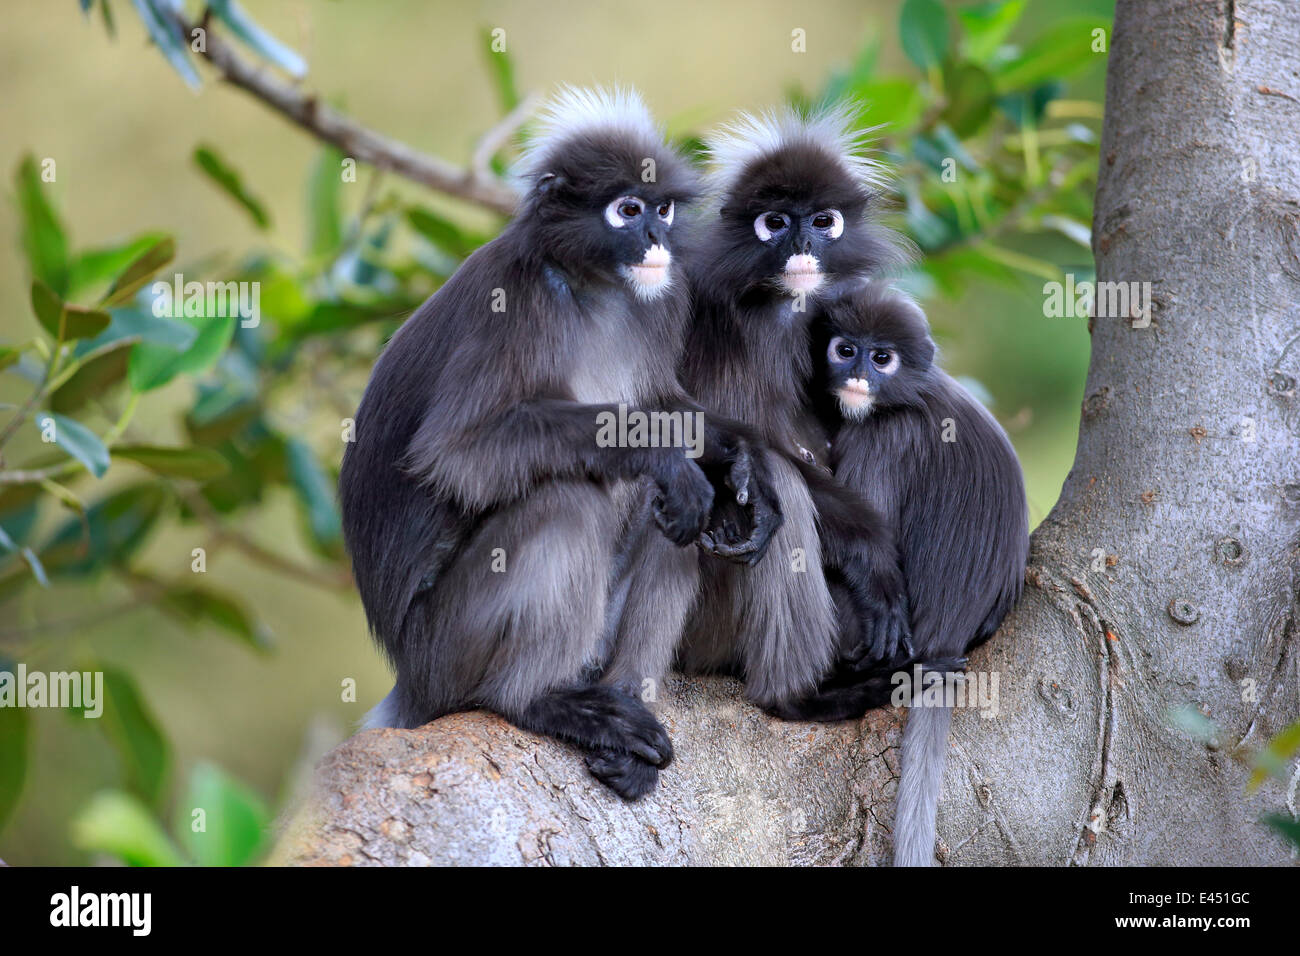 Dusky leaf monkey, spectacled langur, or spectacled leaf monkey  (Trachypithecus obscurus)